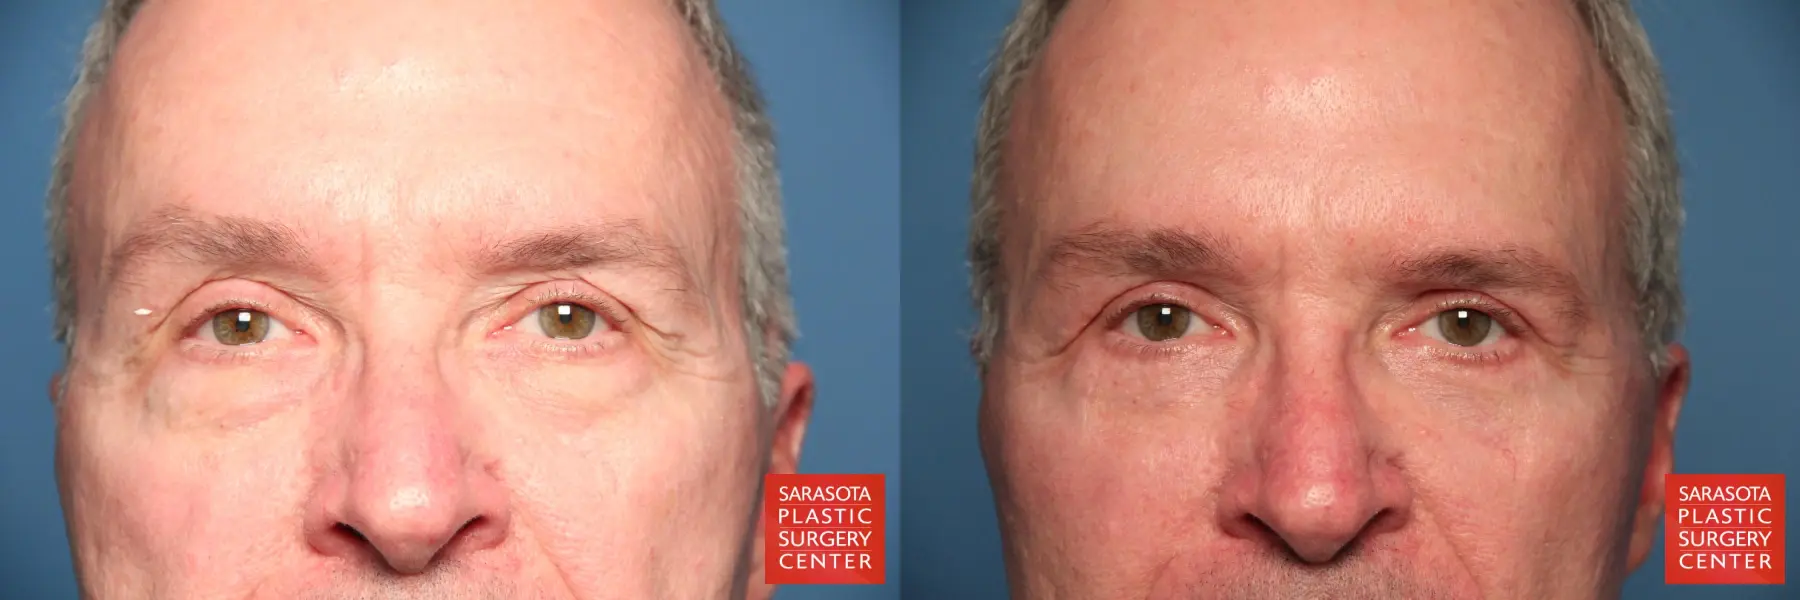 Eyelid Lift For Men: Patient 2 - Before and After 1